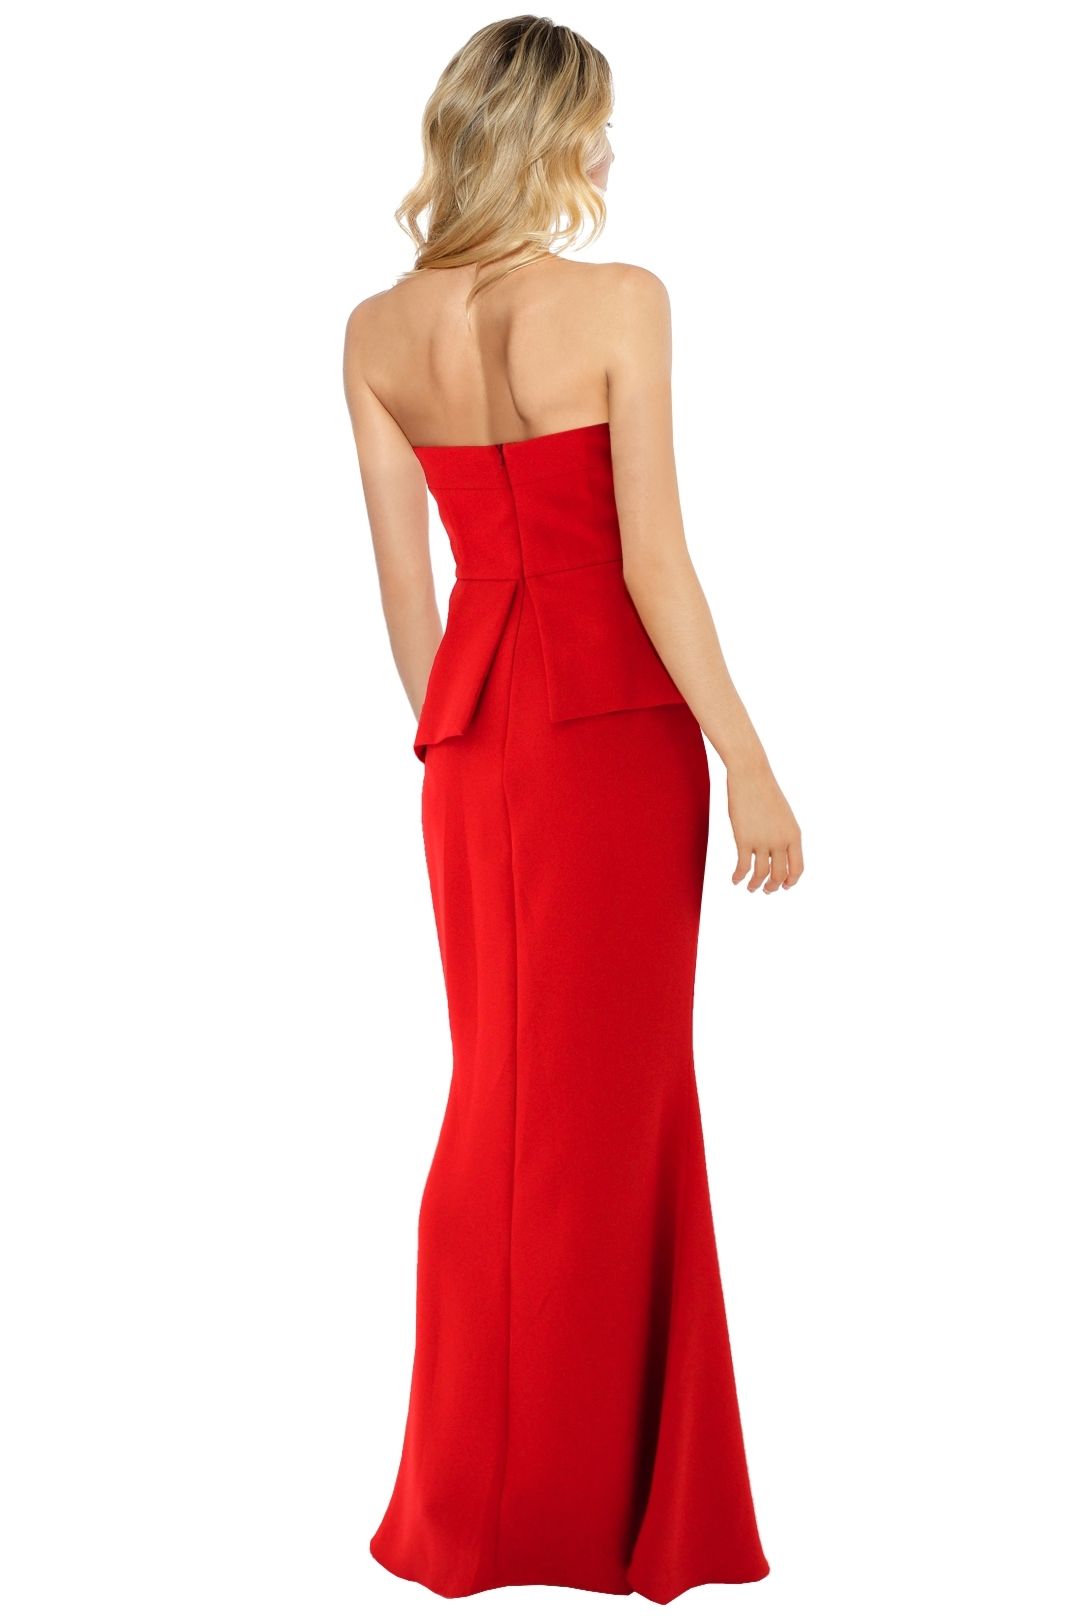 Sheike - Queen of Hearts Maxi Dress - Red - Back